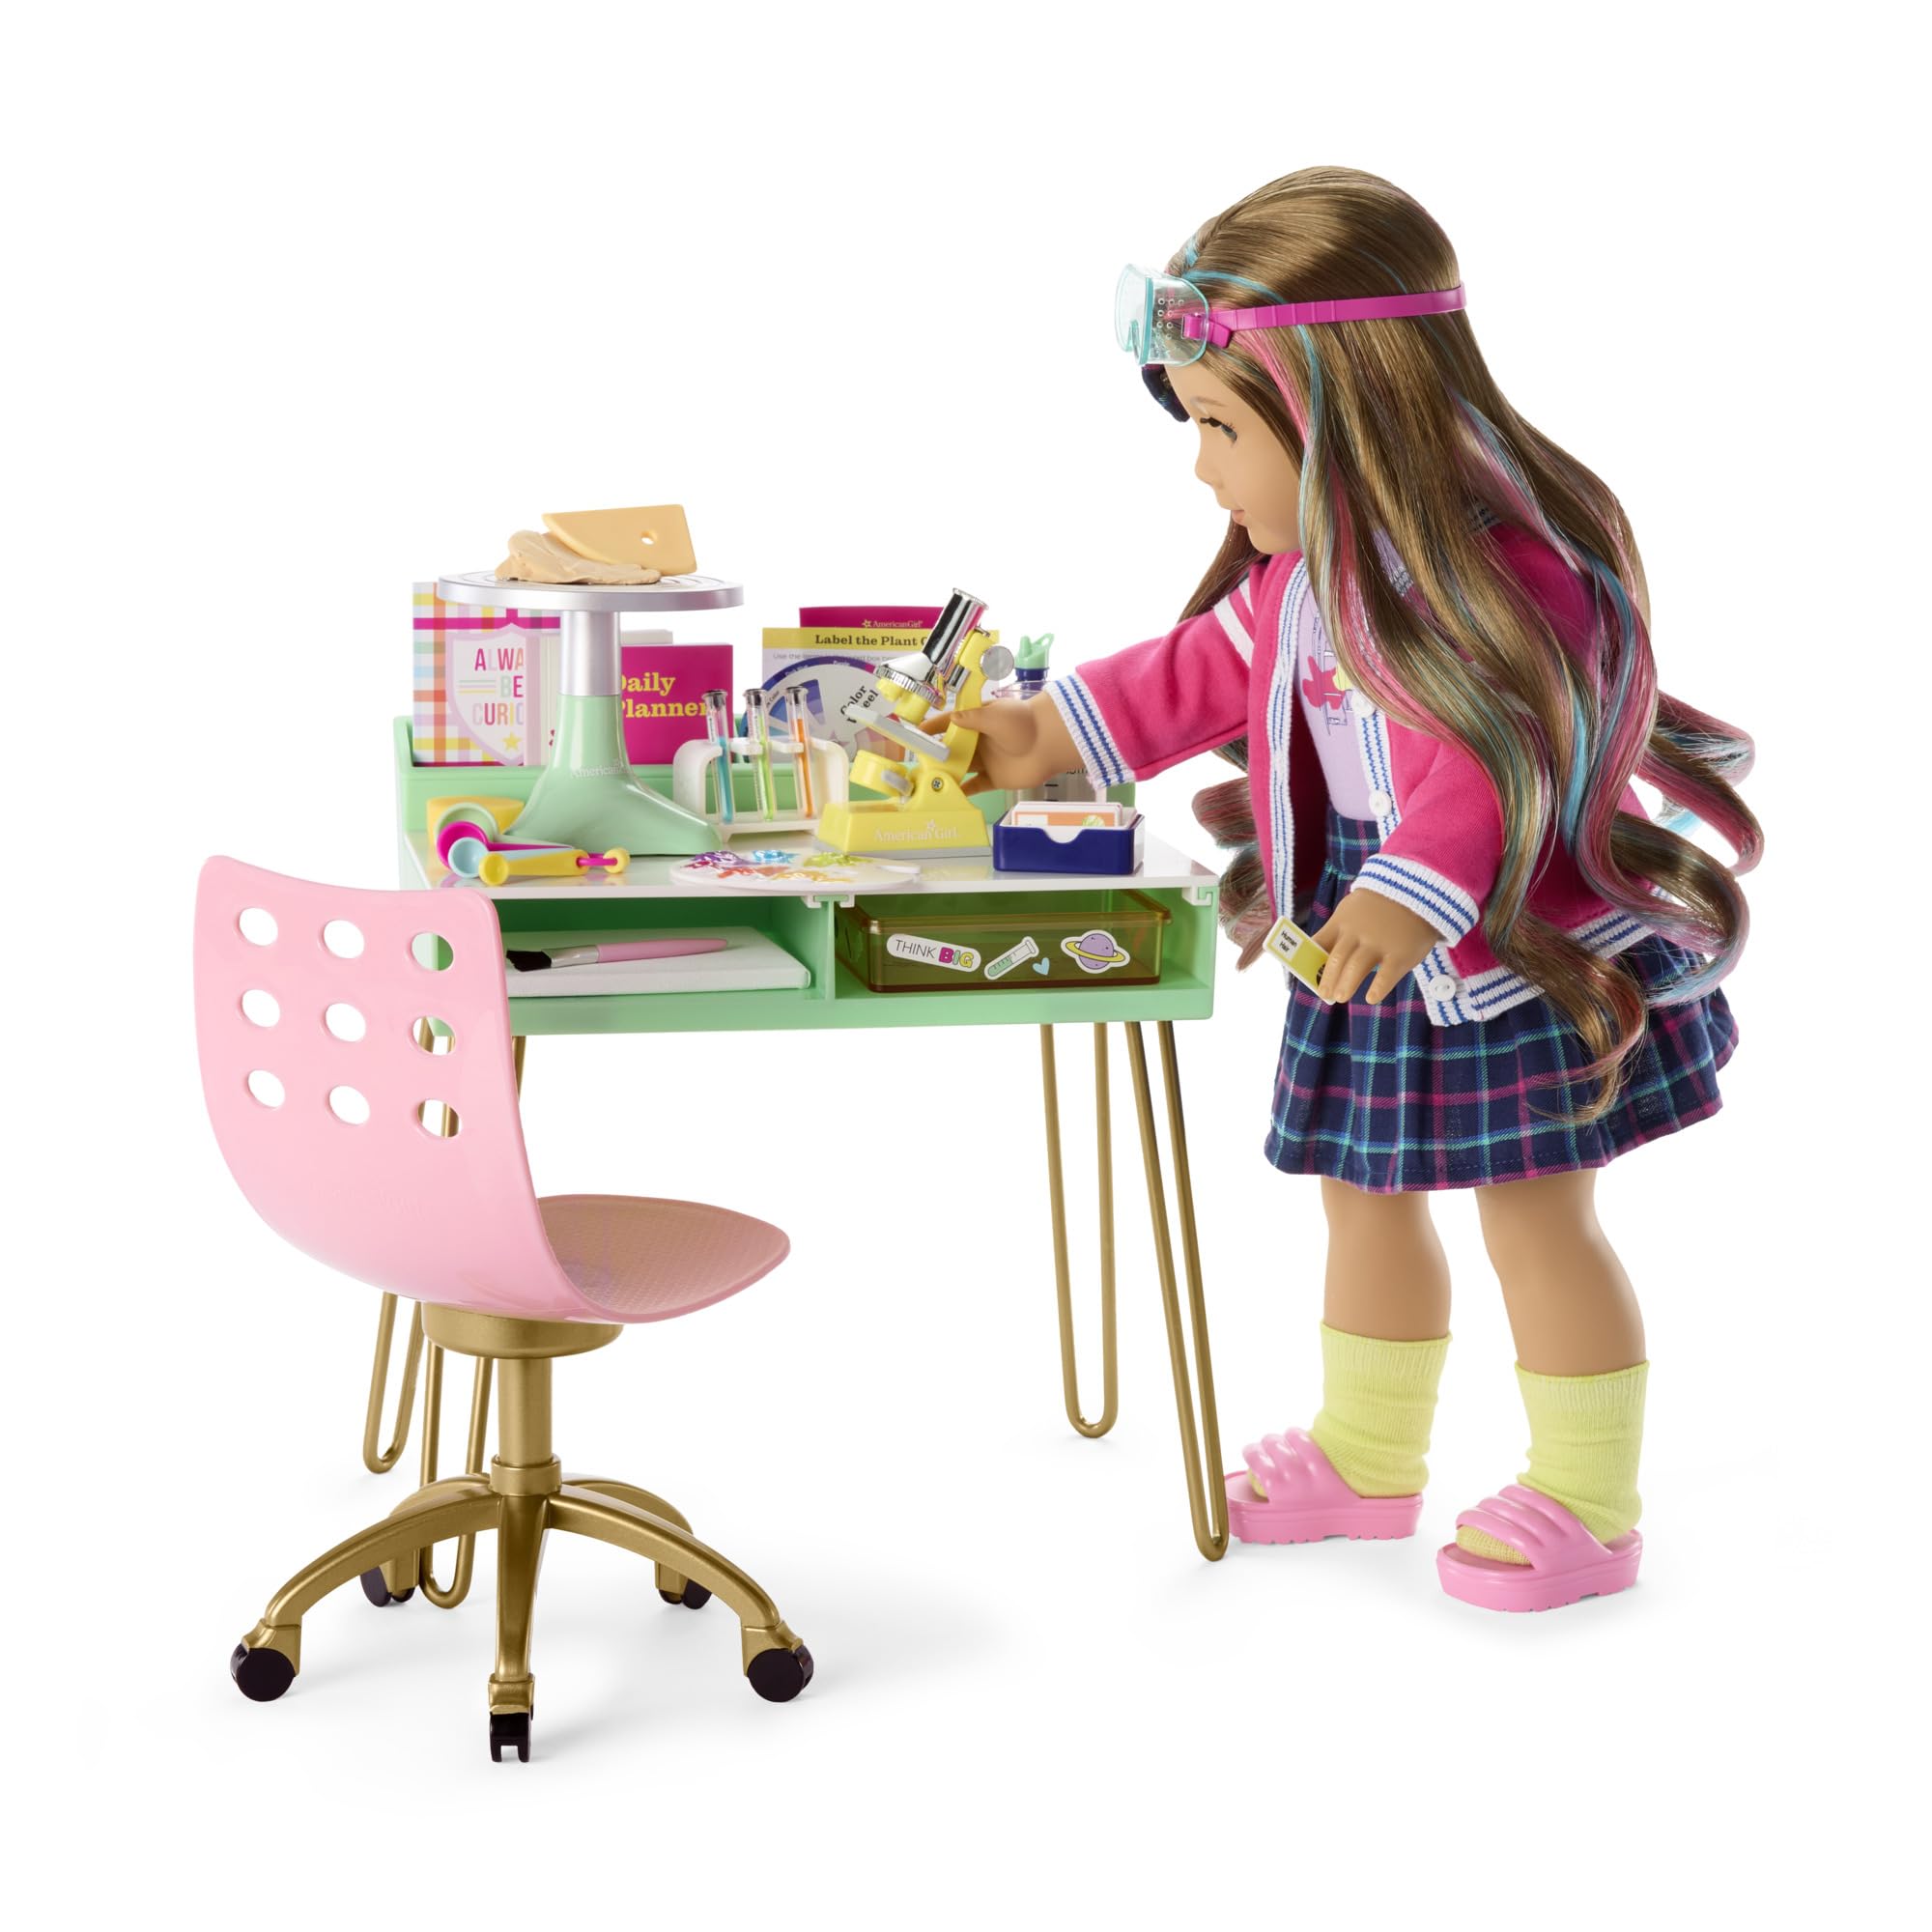 American Girl Truly Me Love to Explore Art & Science 12-Piece Set for 18-inch Dolls with a Tabletop Pottery Wheel, a Pretend Microscope, a White Art Canvas, a Paintbrush, and a Paint Palette Ages 6+